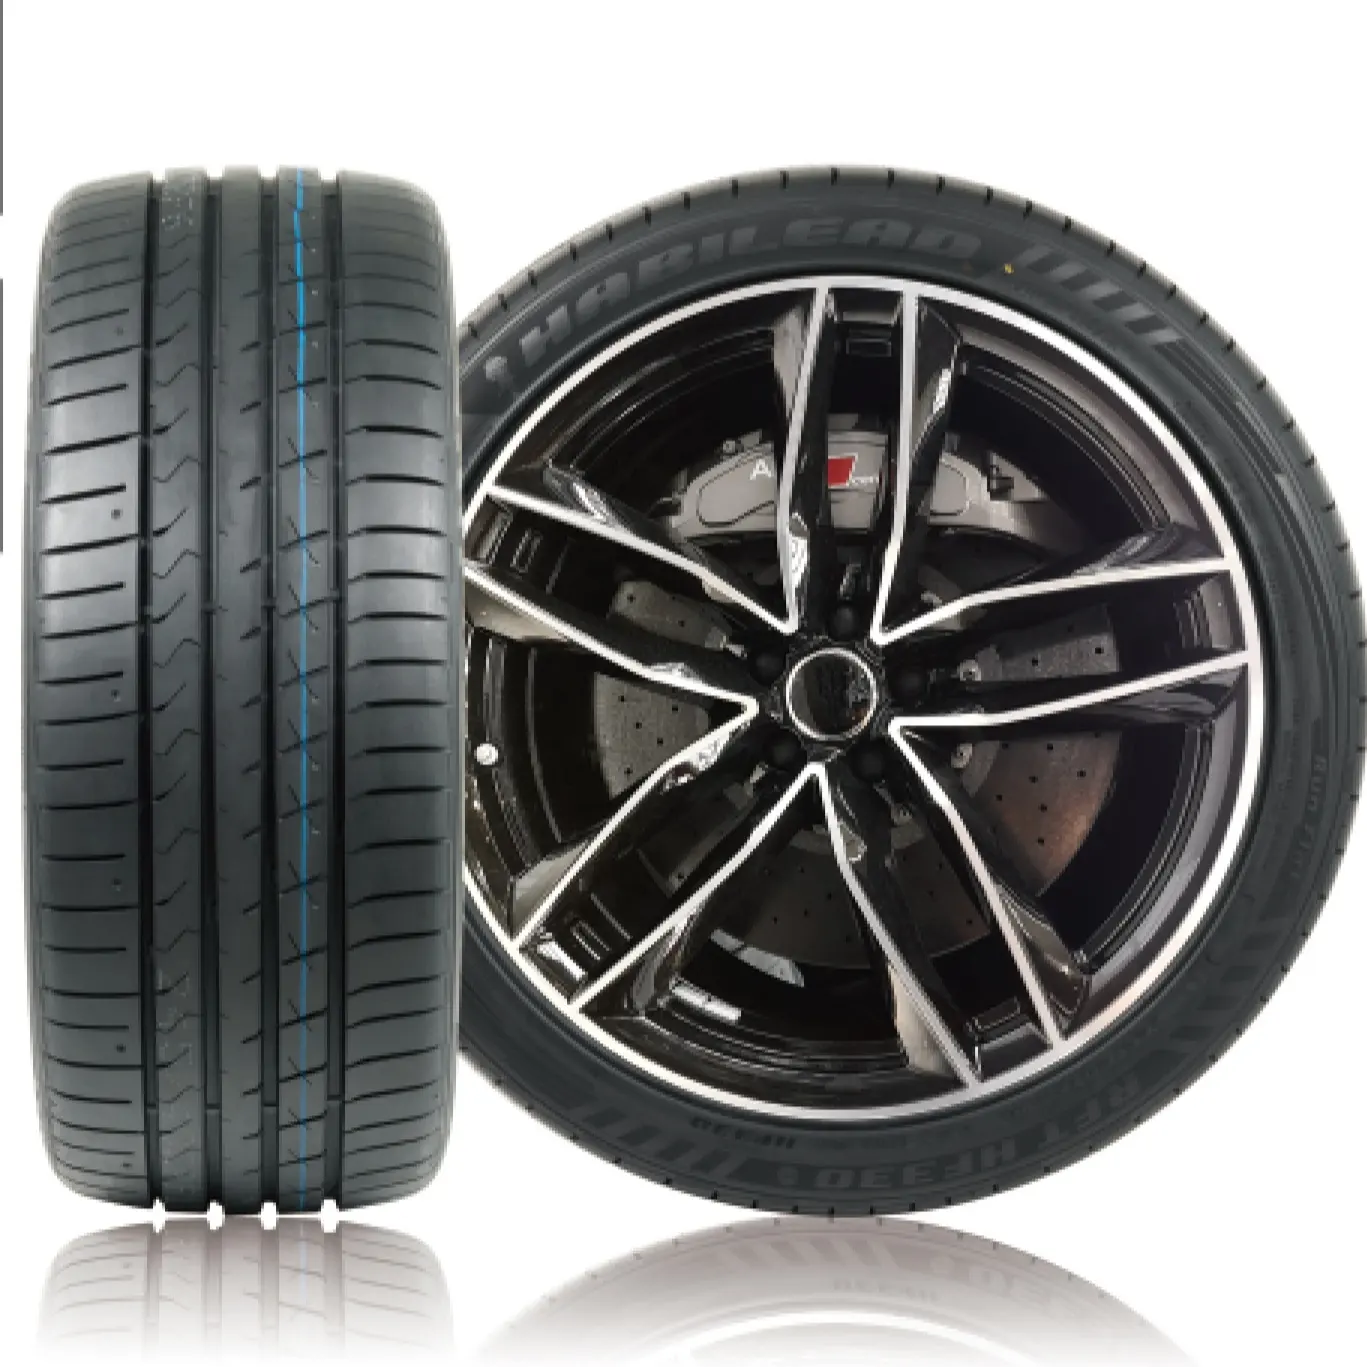 High perfomance new cheap chinese brand car tires HF330 245/45ZR20 255/35ZR19 top car tire